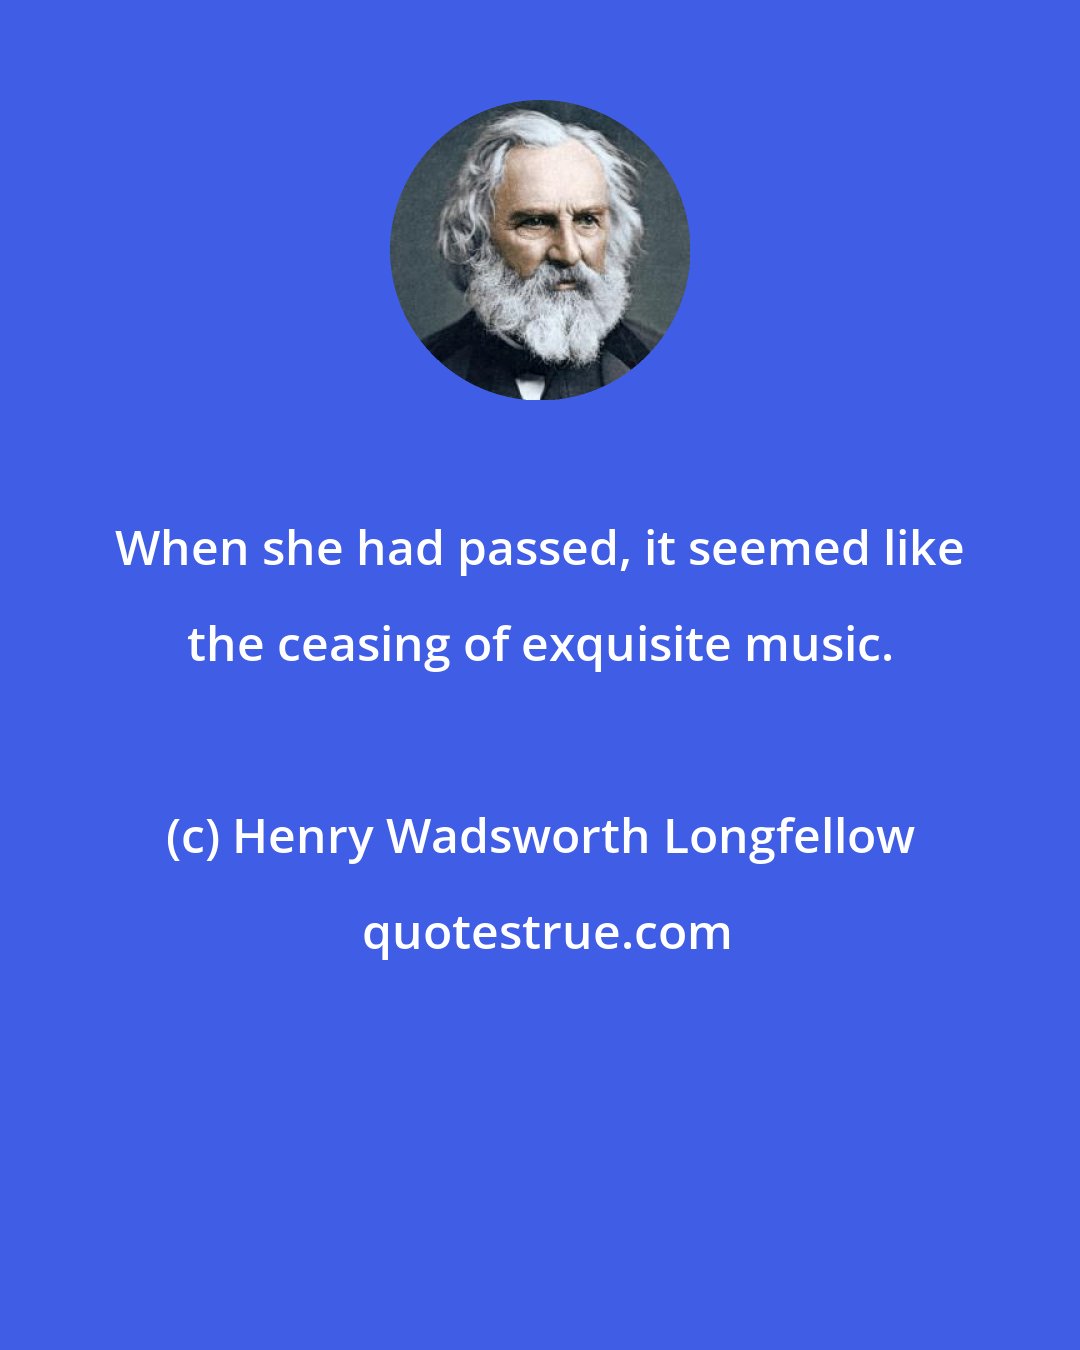 Henry Wadsworth Longfellow: When she had passed, it seemed like the ceasing of exquisite music.